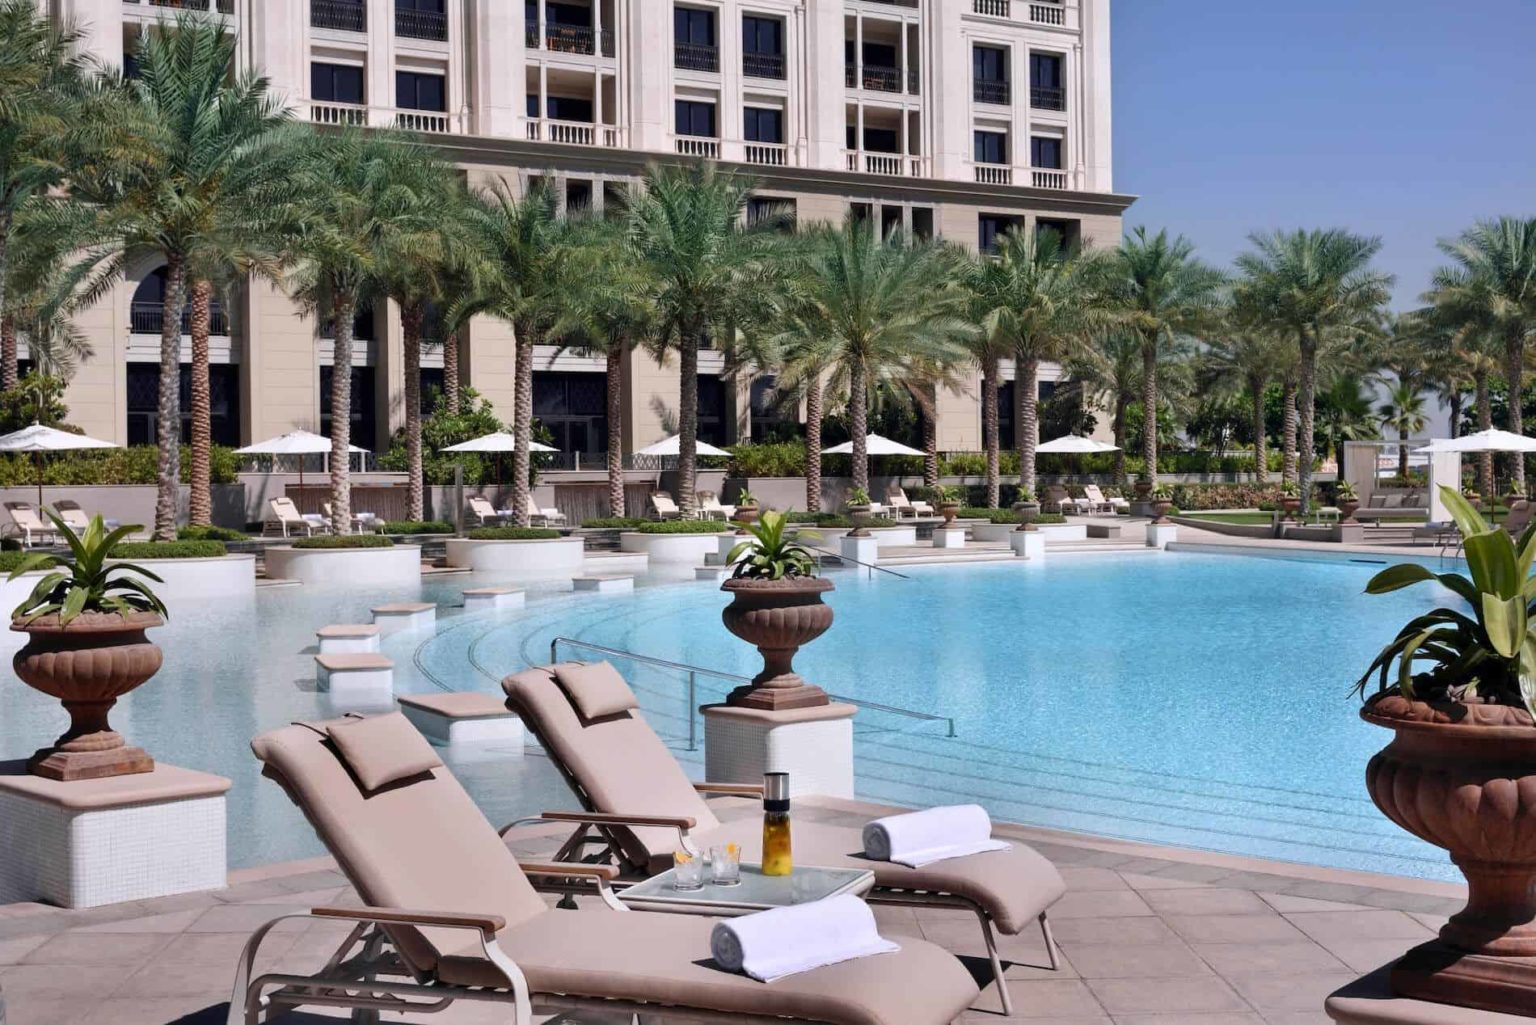 Sun loungers by the pool at Palazzo Versace Dubai Hotel